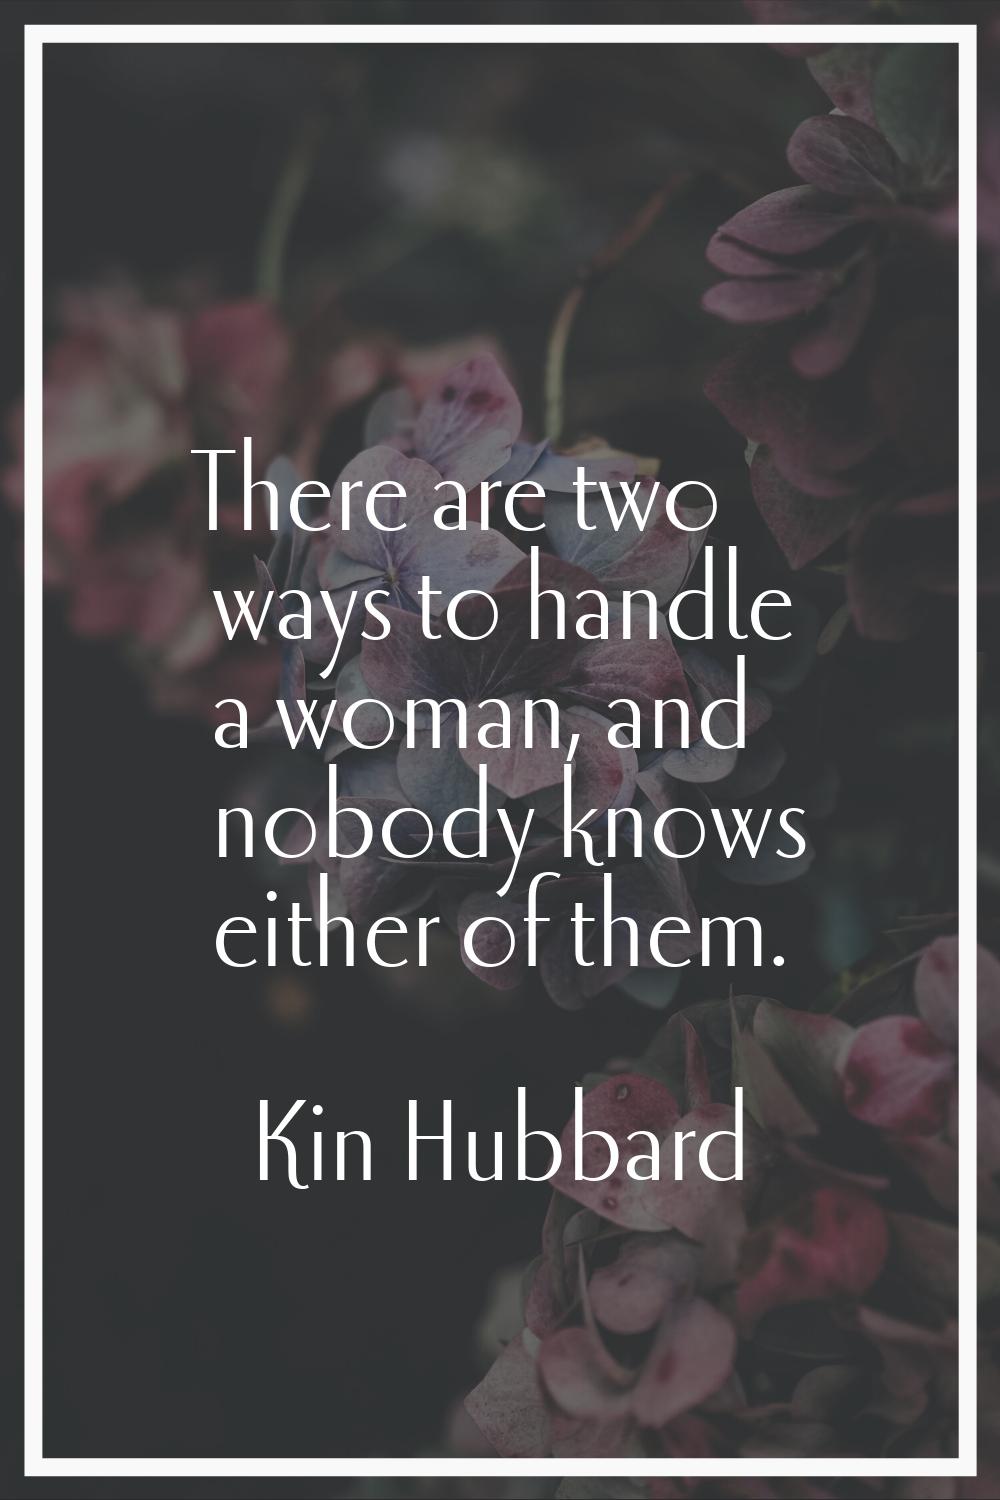 There are two ways to handle a woman, and nobody knows either of them.